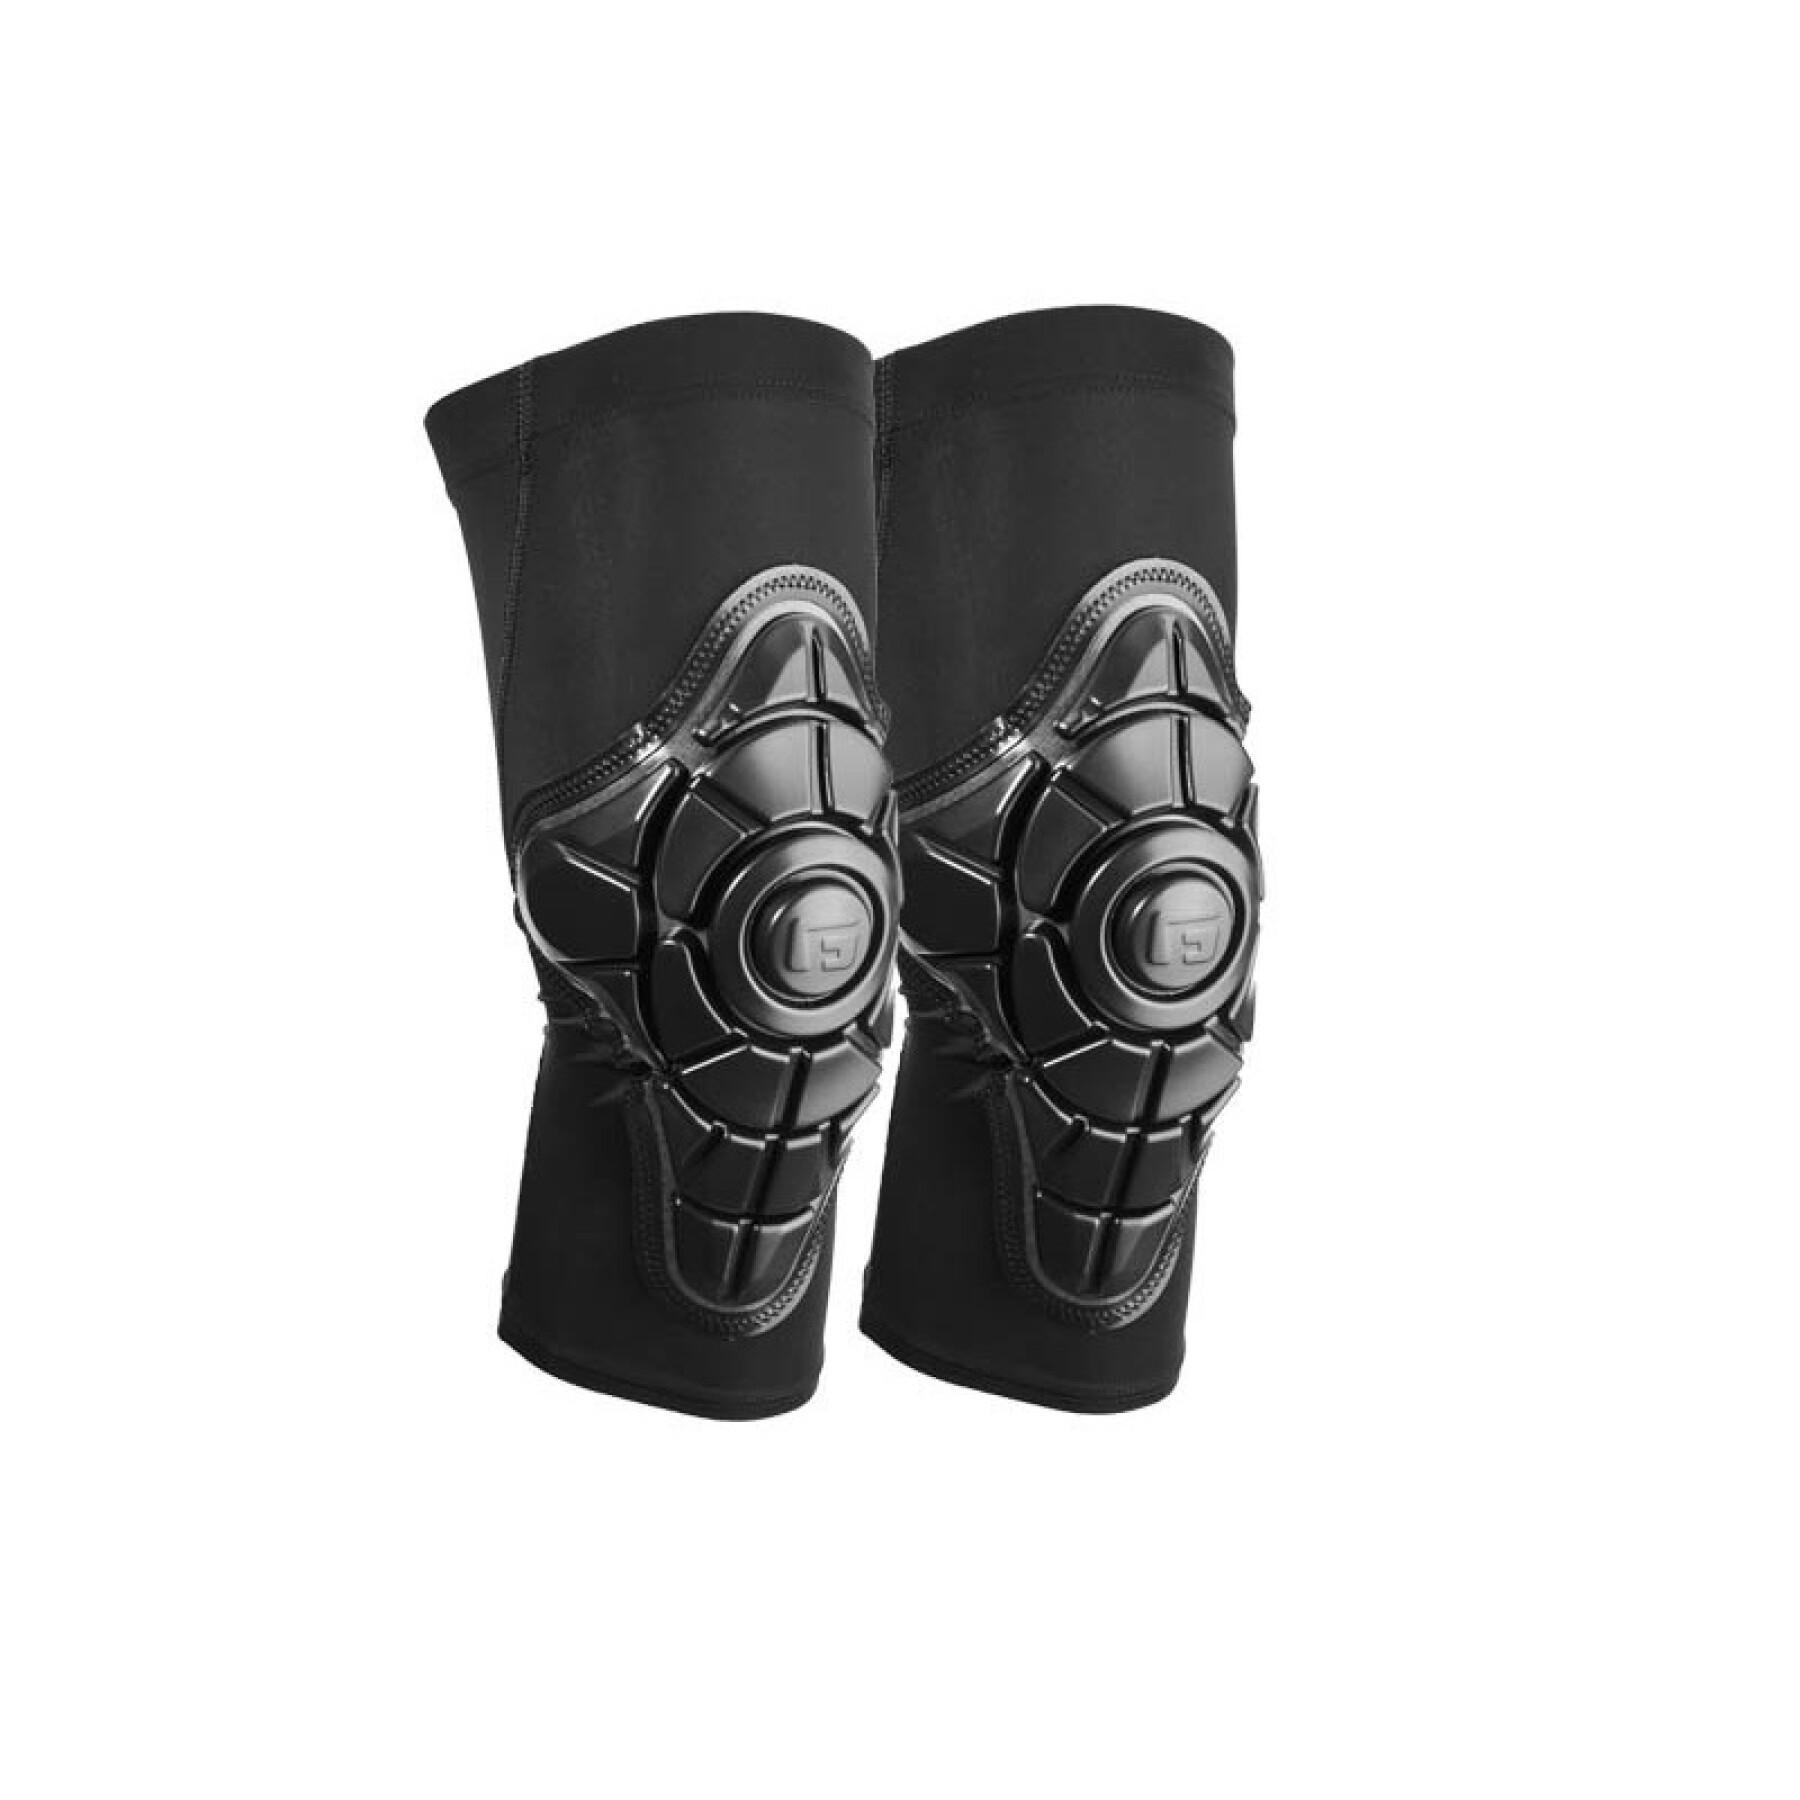 Knee pads for children G-Form Pro-X (x2)